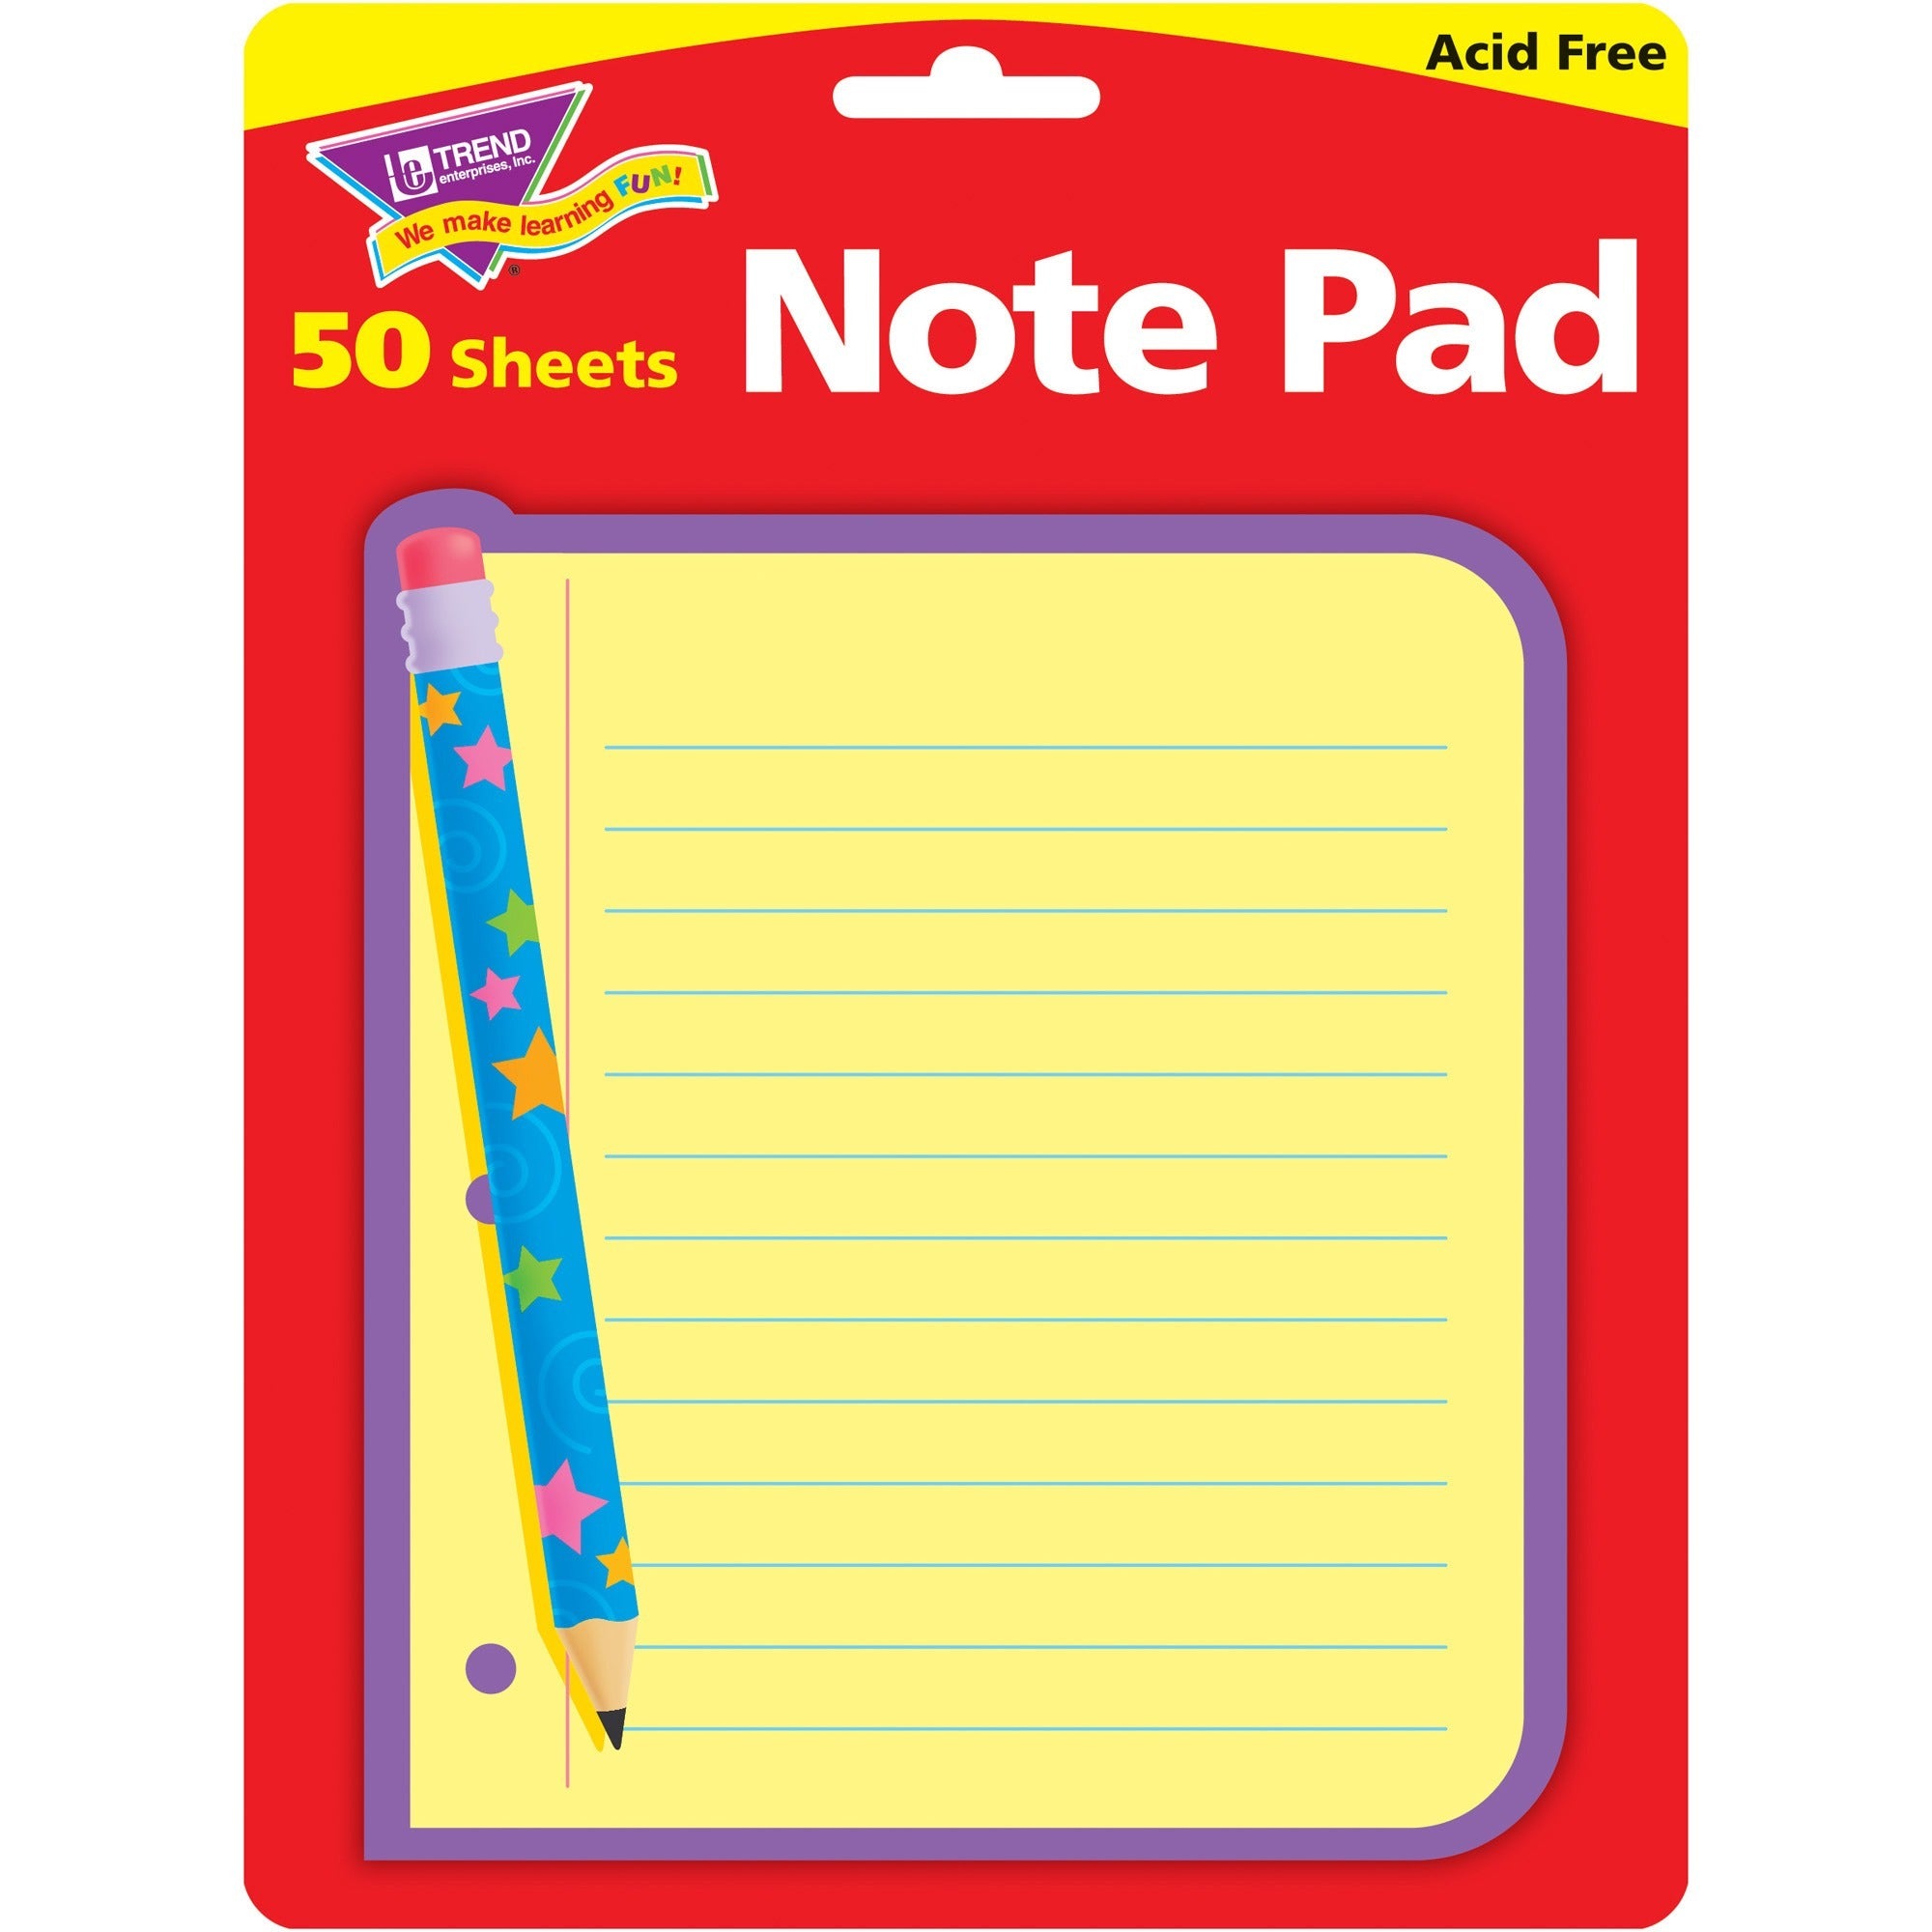 trend-cheerful-design-note-pad-50-sheets-5-x-5-acid-free-50-pad_tept72029 - 1